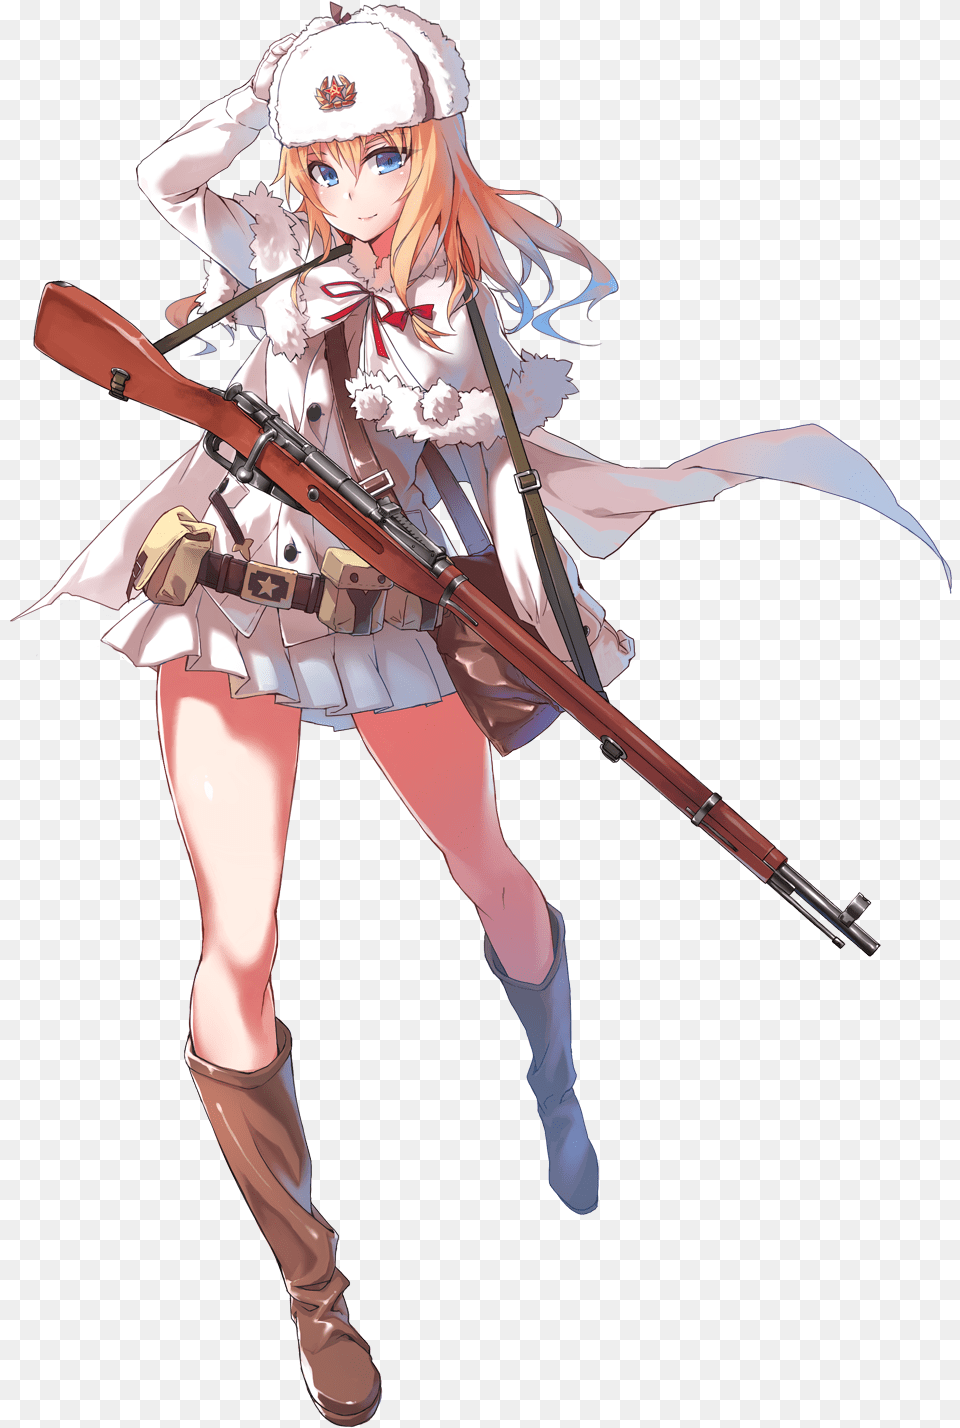 The Mosin Nagant Is A Bolt Action Rifle Developed By Mosin Nagant Girls Frontline, Book, Publication, Comics, Adult Free Png